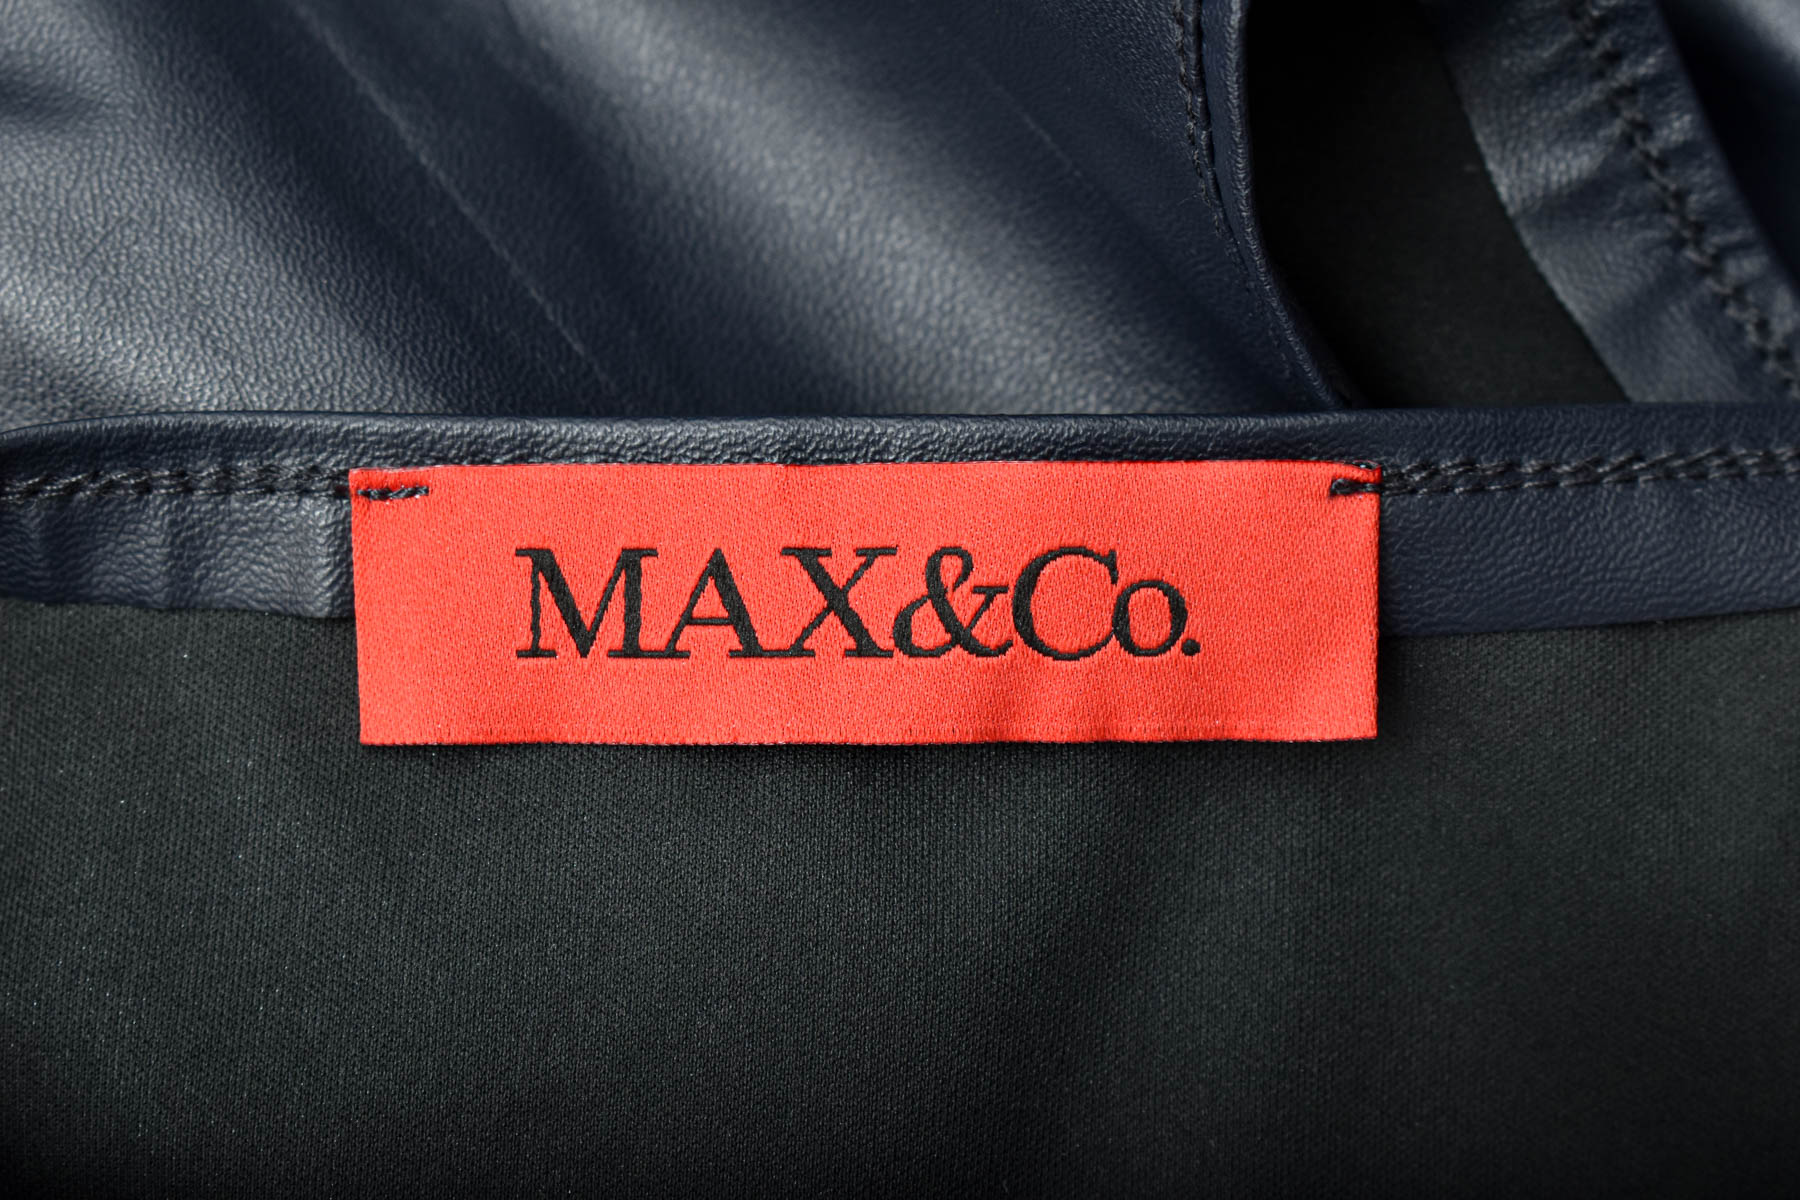 Leather dress - Max&Co. - 2